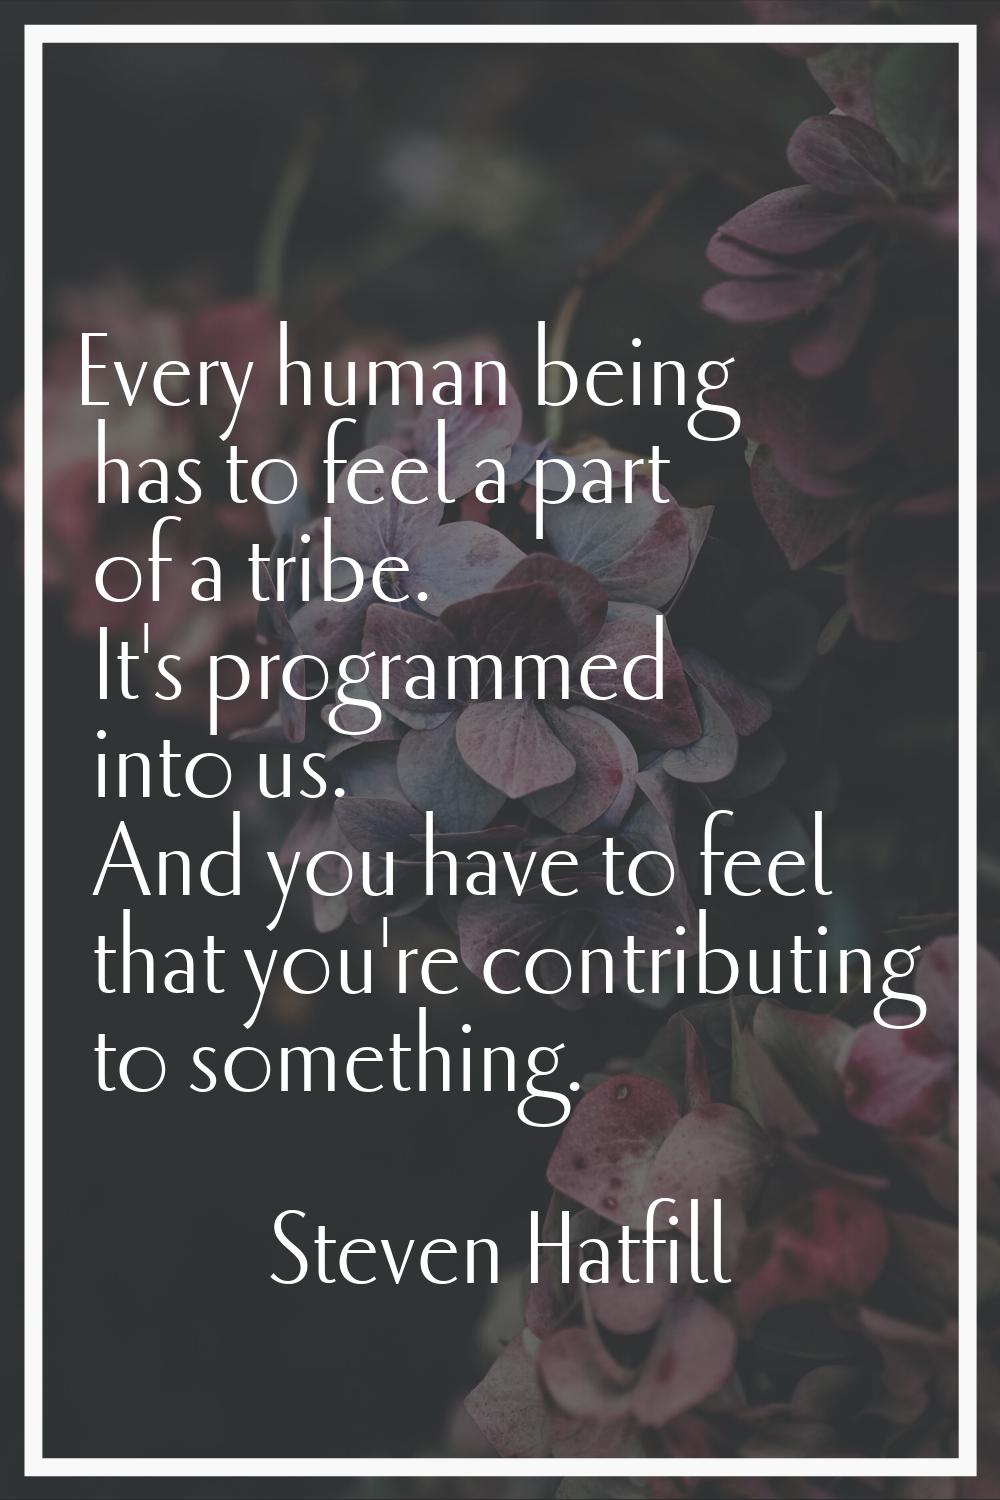 Every human being has to feel a part of a tribe. It's programmed into us. And you have to feel that